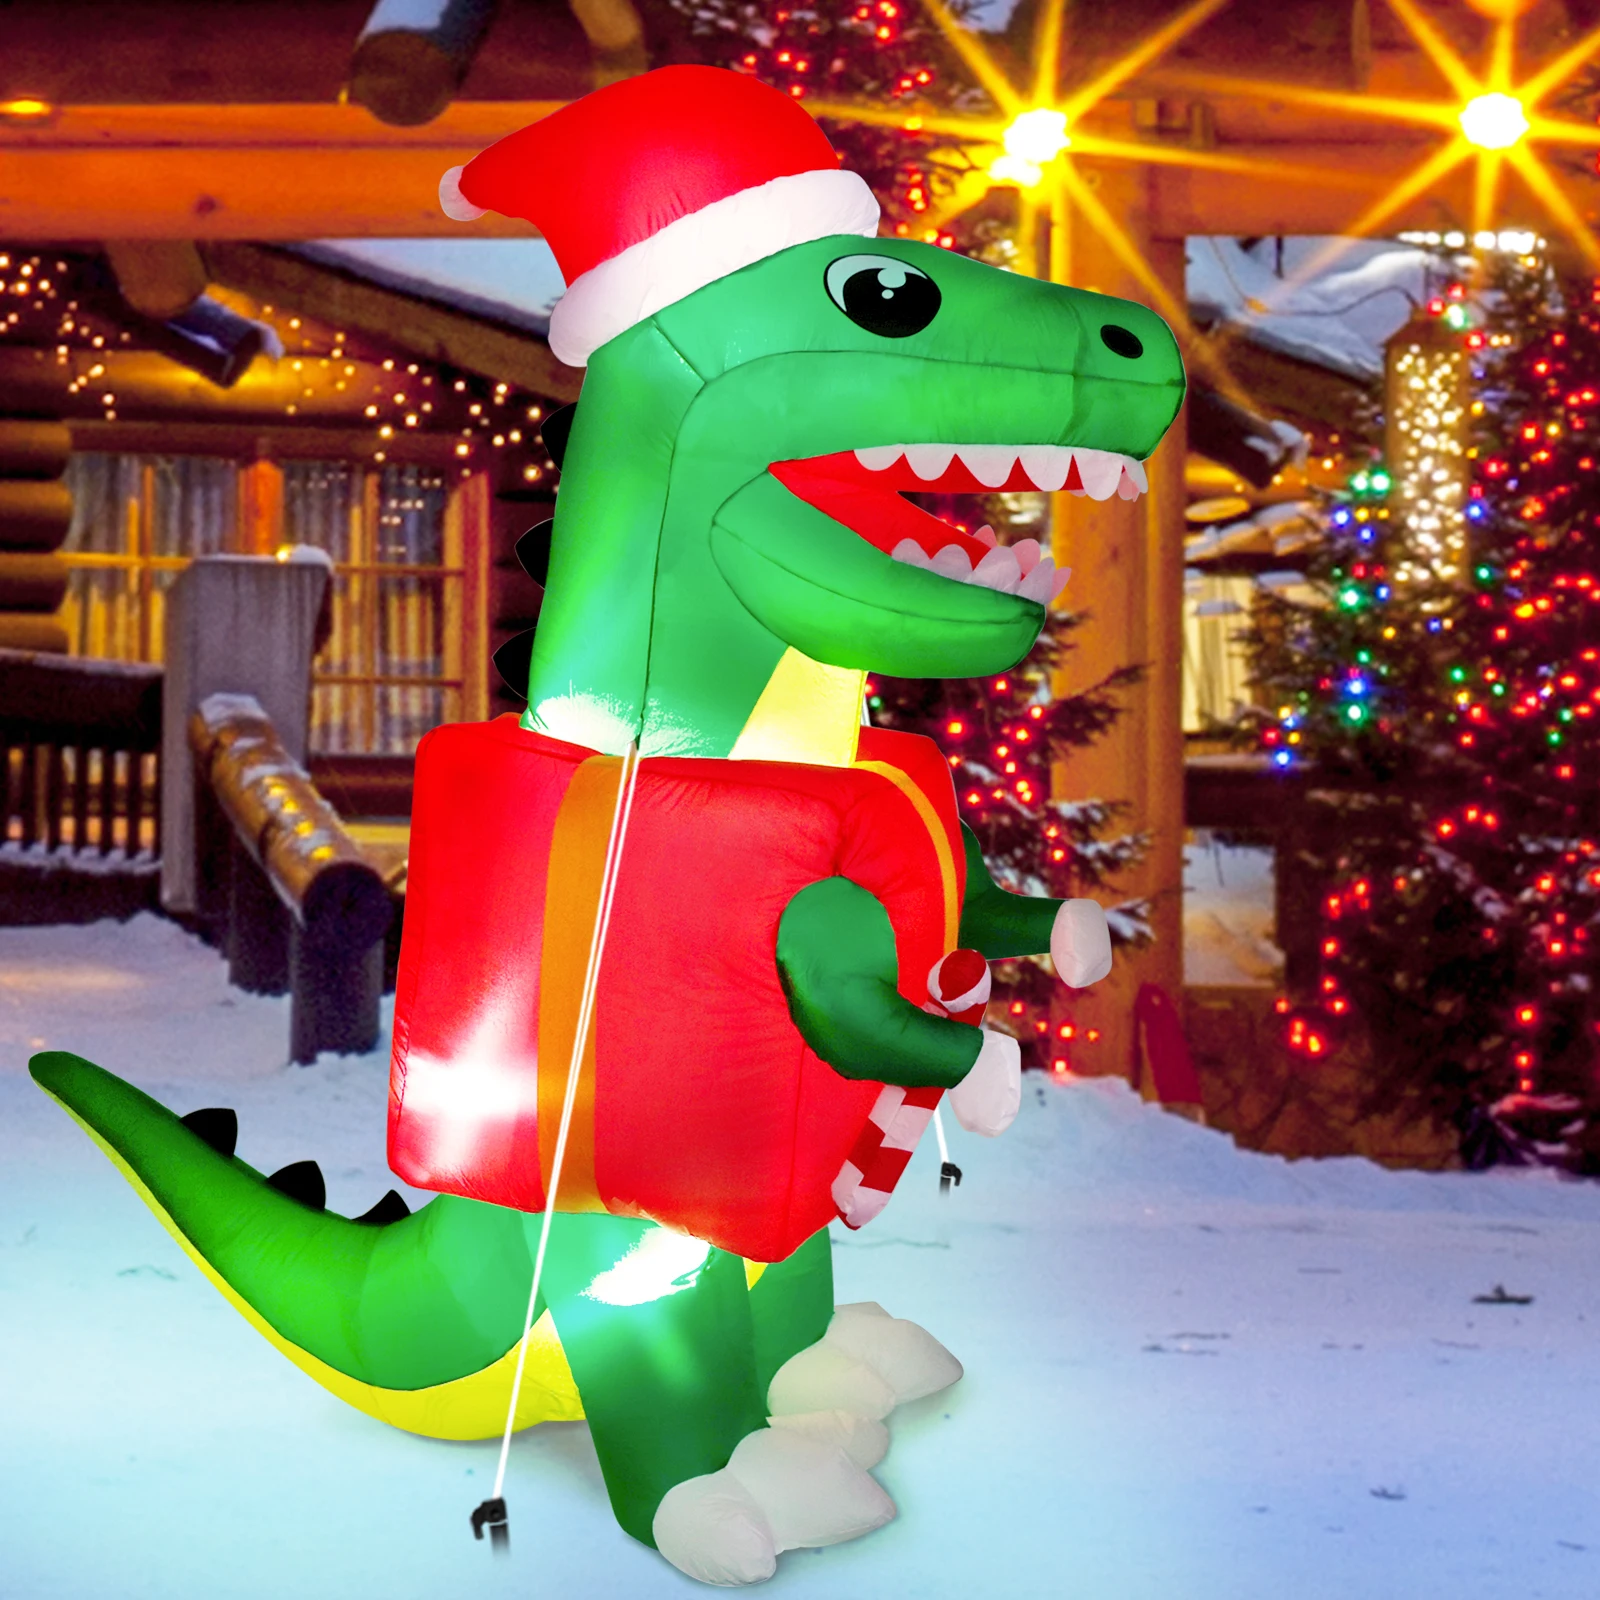 OurWarm 6FT Dinosaur Christmas Inflatable Outdoor Decorations With LED Lights Decoration For Party Courtyard Lawn 2022 Ornament